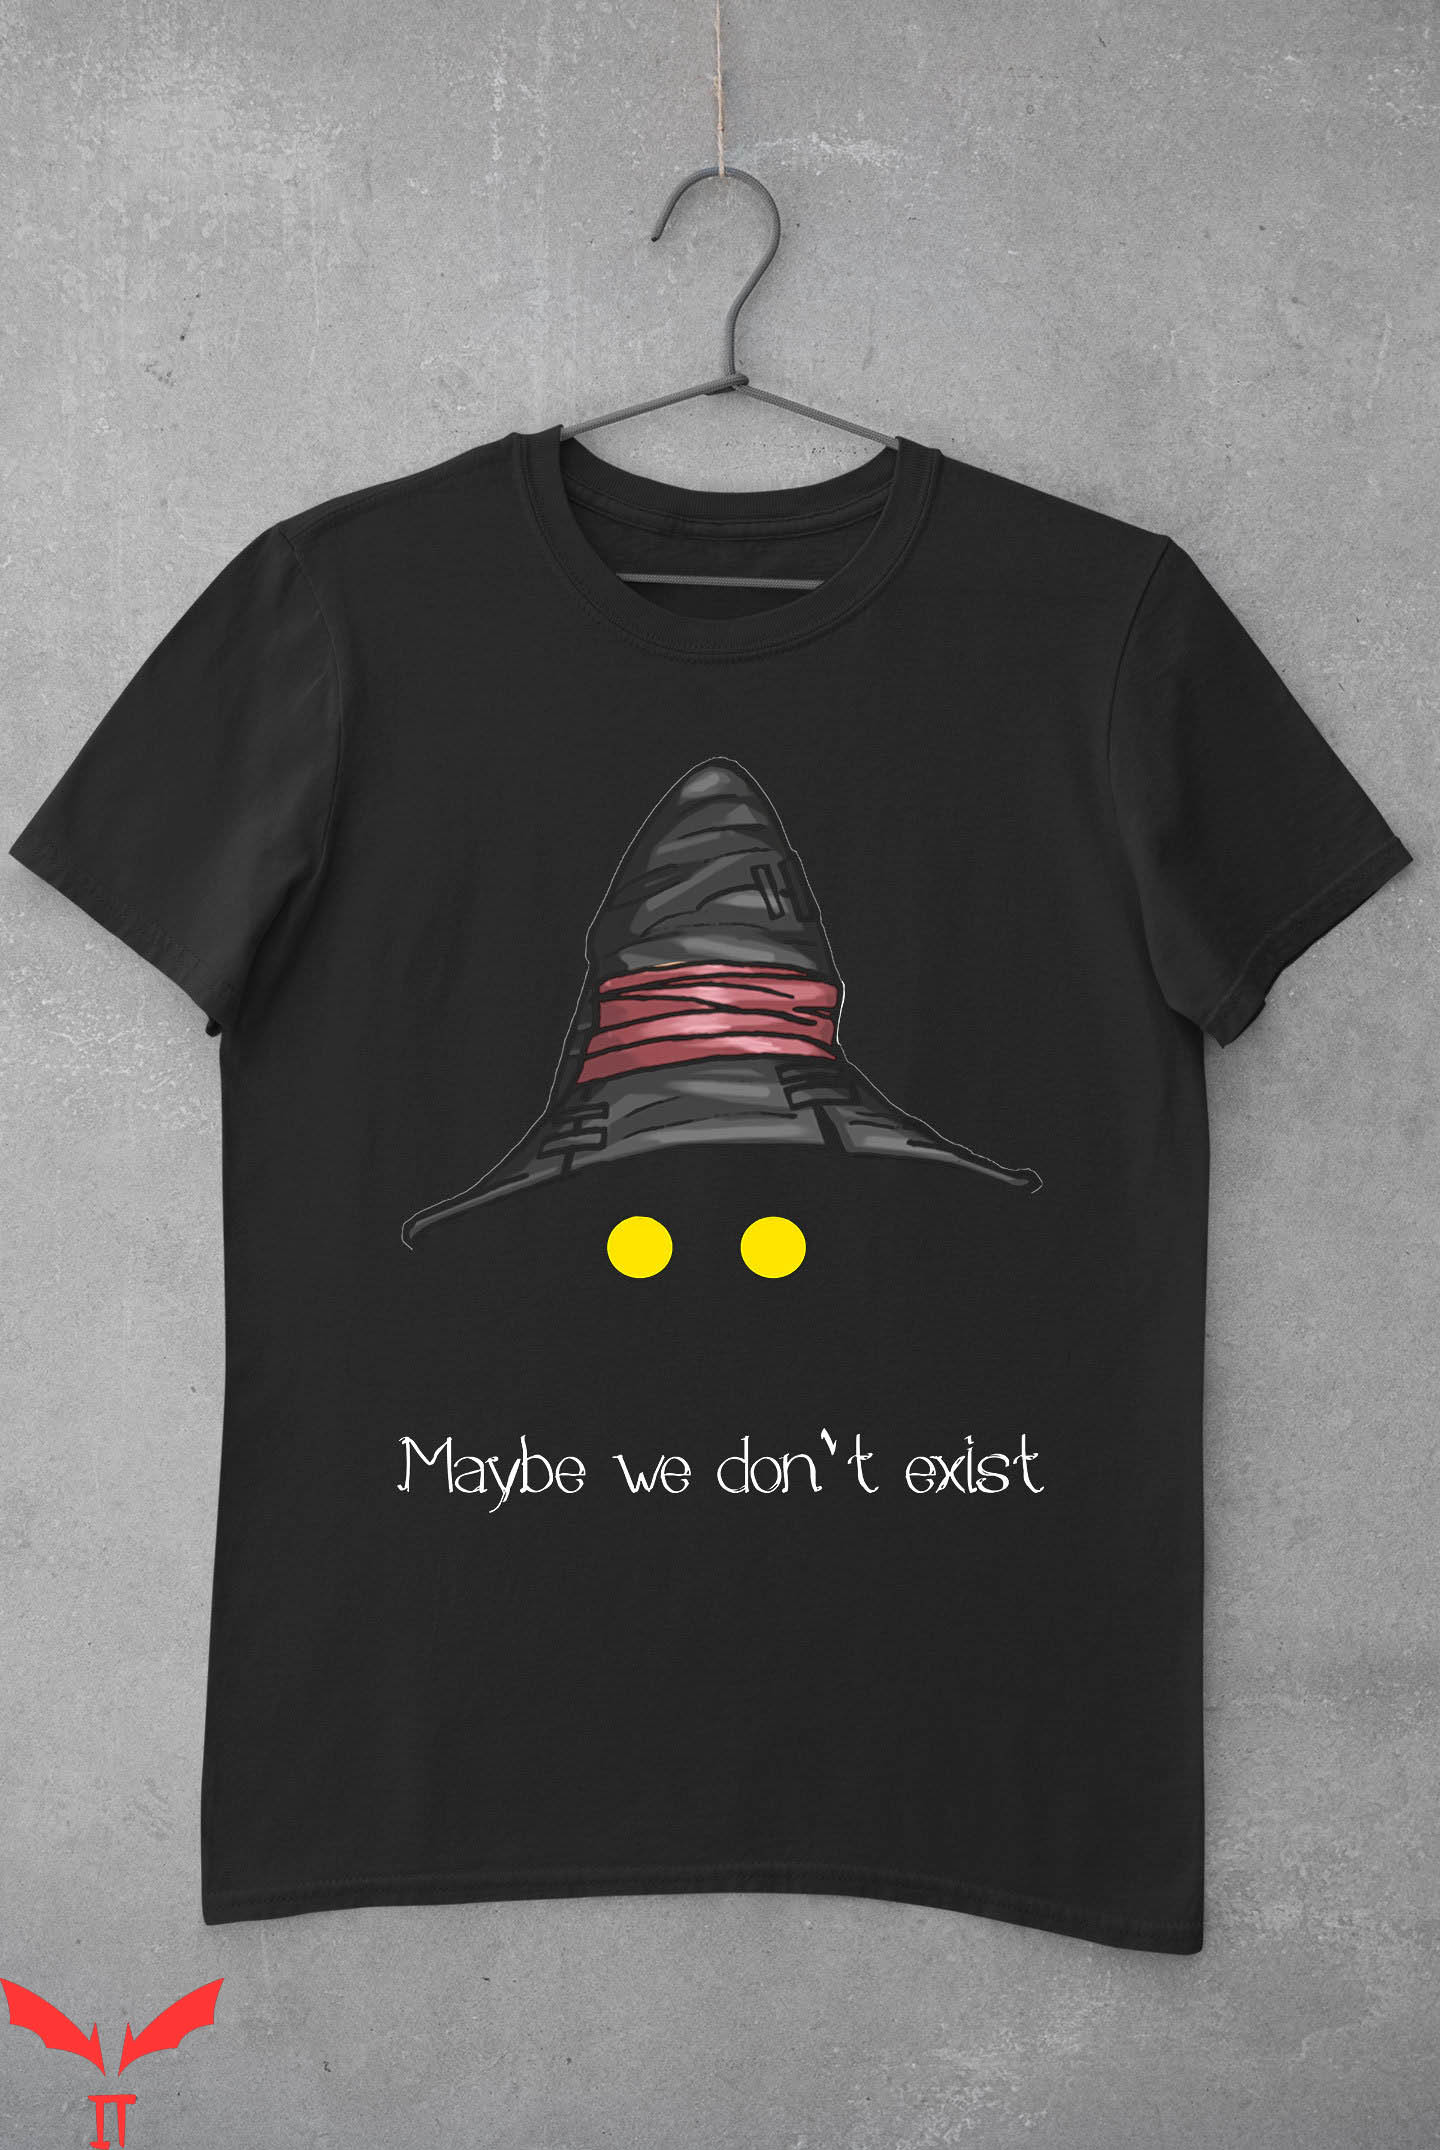 Final Fantasy 9 11 T-Shirt Maybe We Don't Exist FFIX